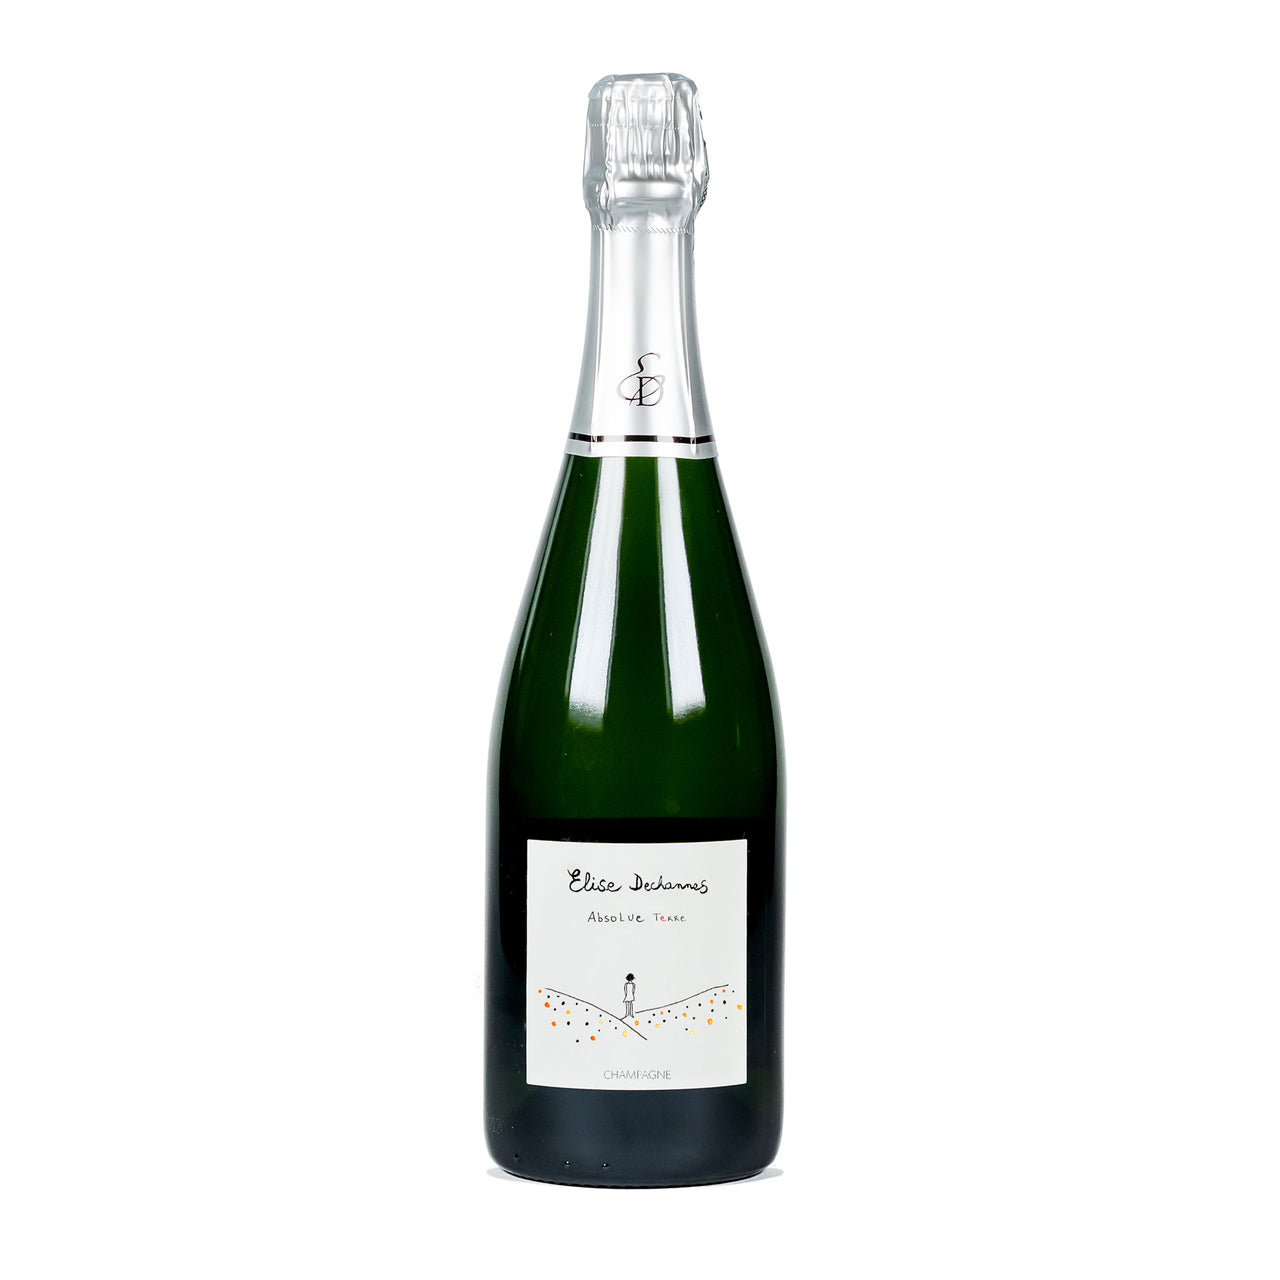 Absolue Terre Brut Nature